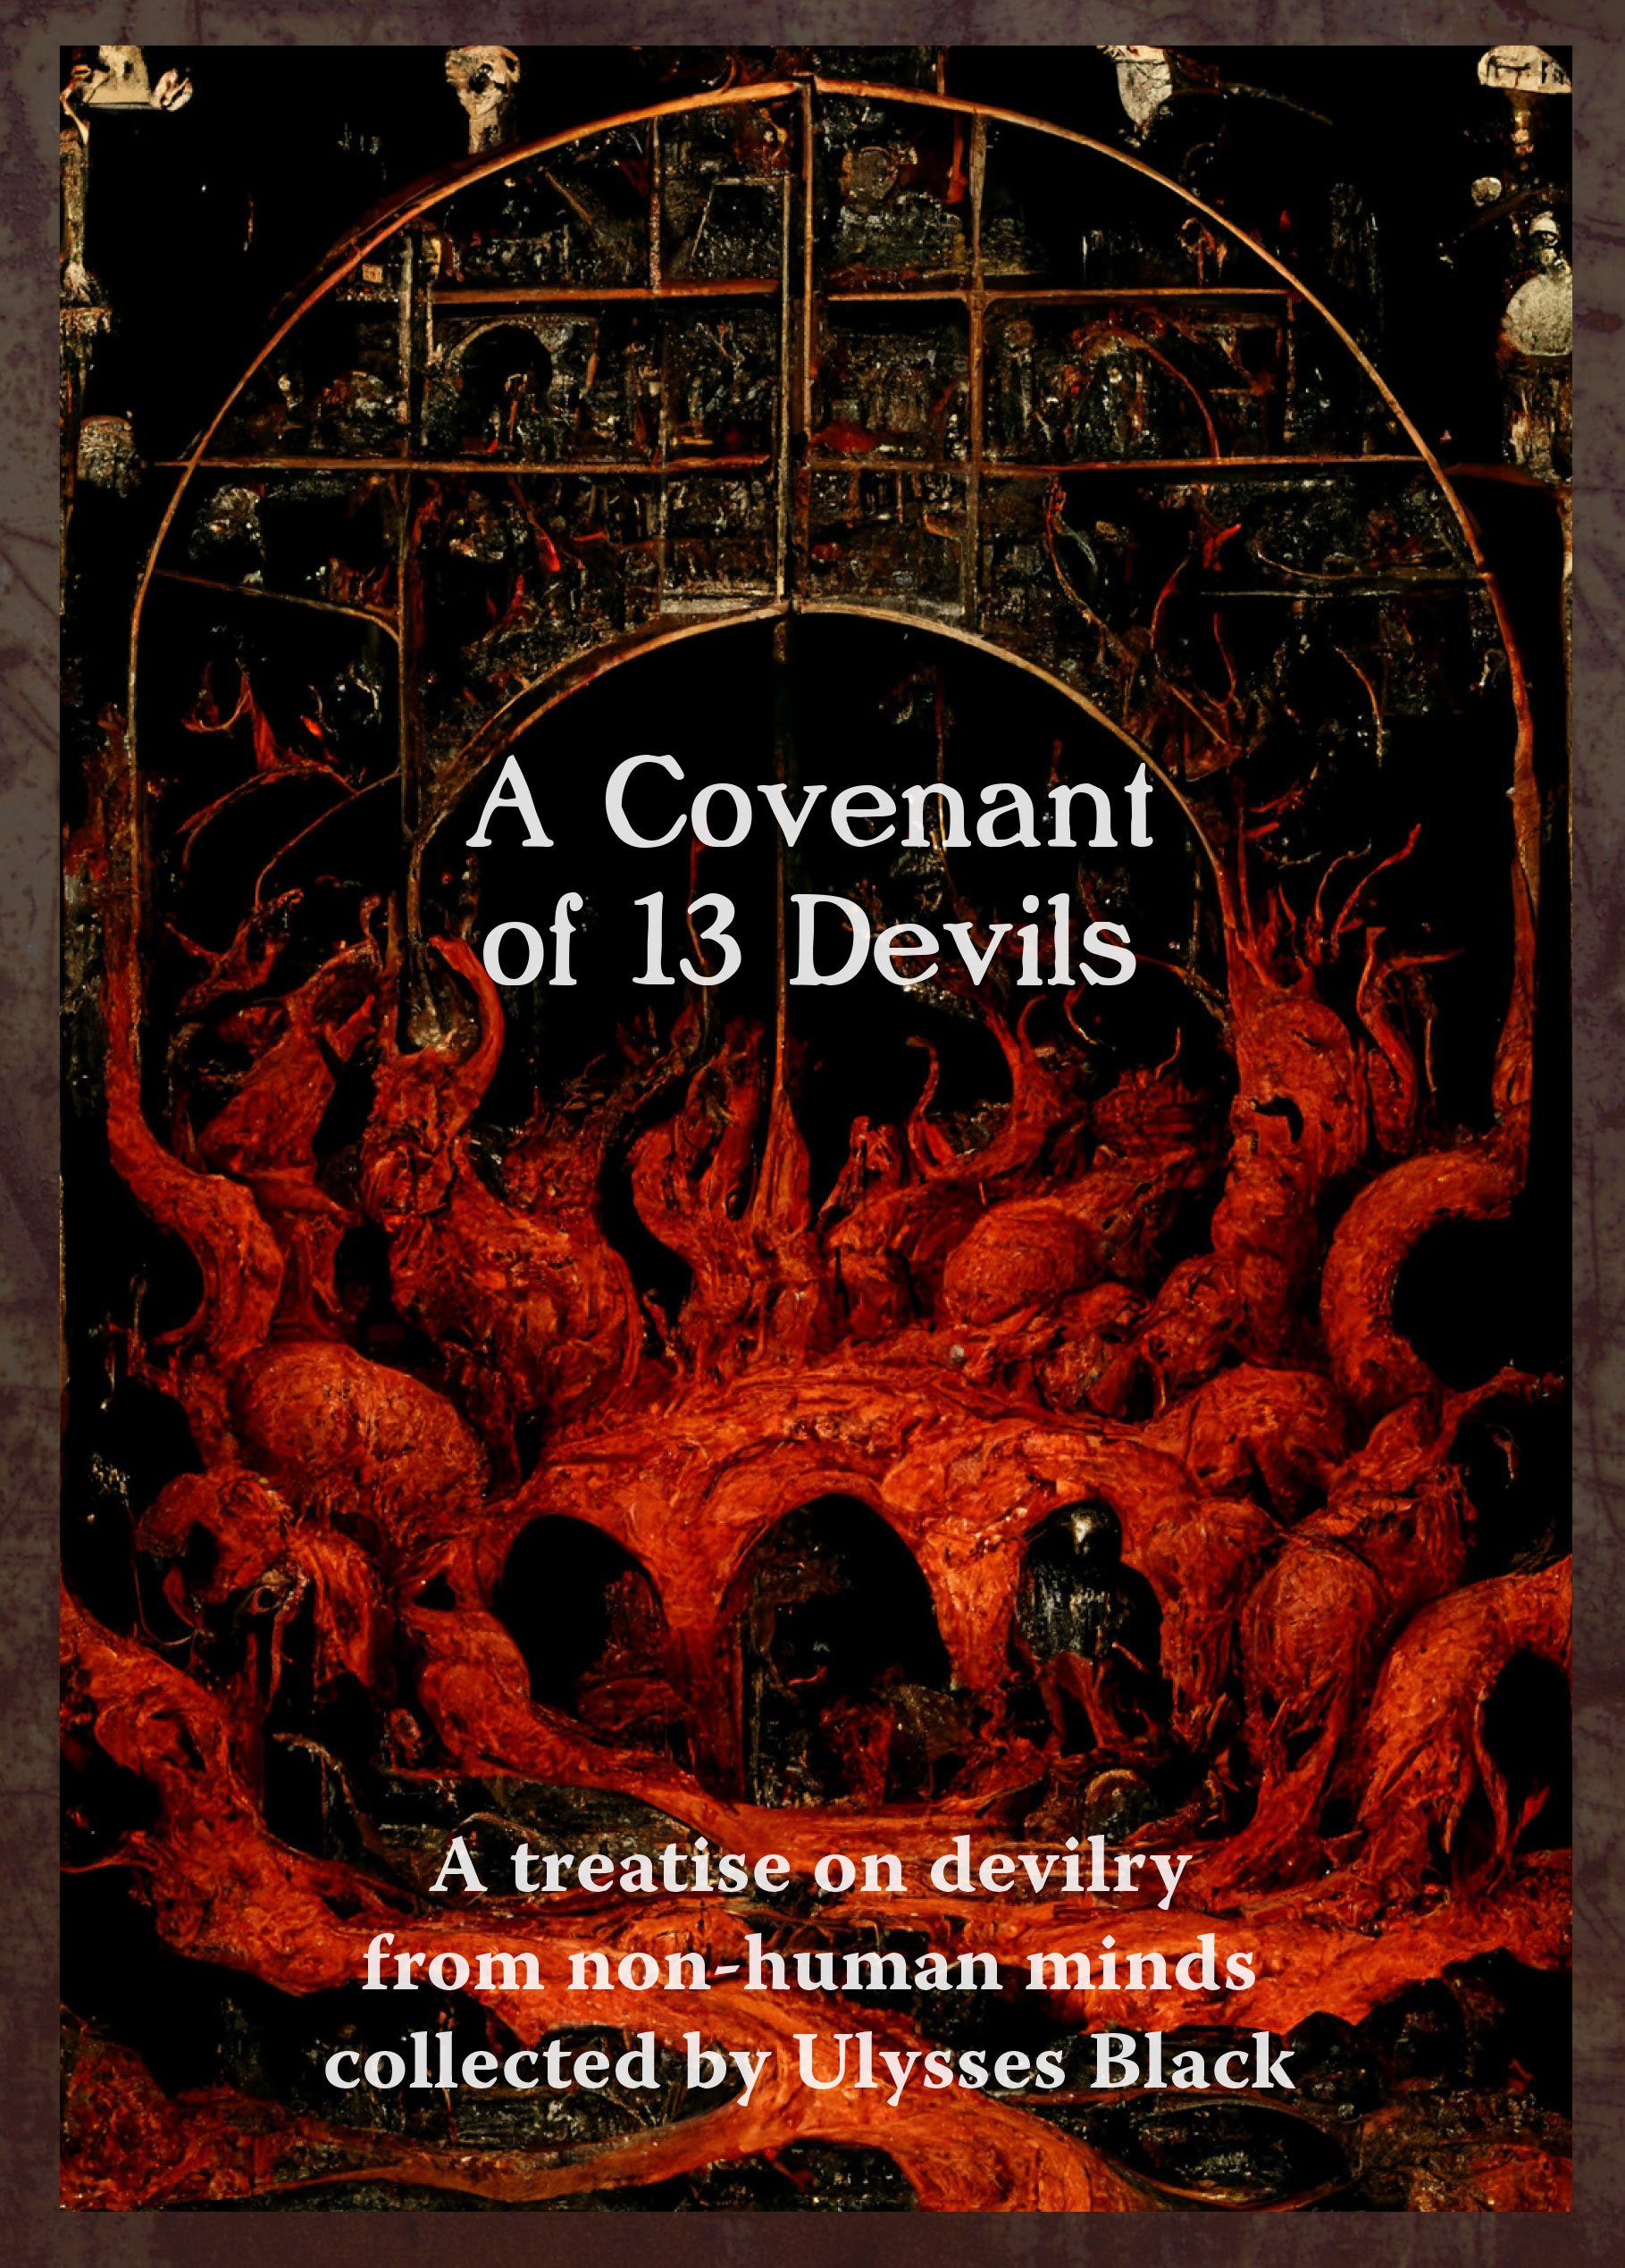 2022: A Covenant of 13 Devils